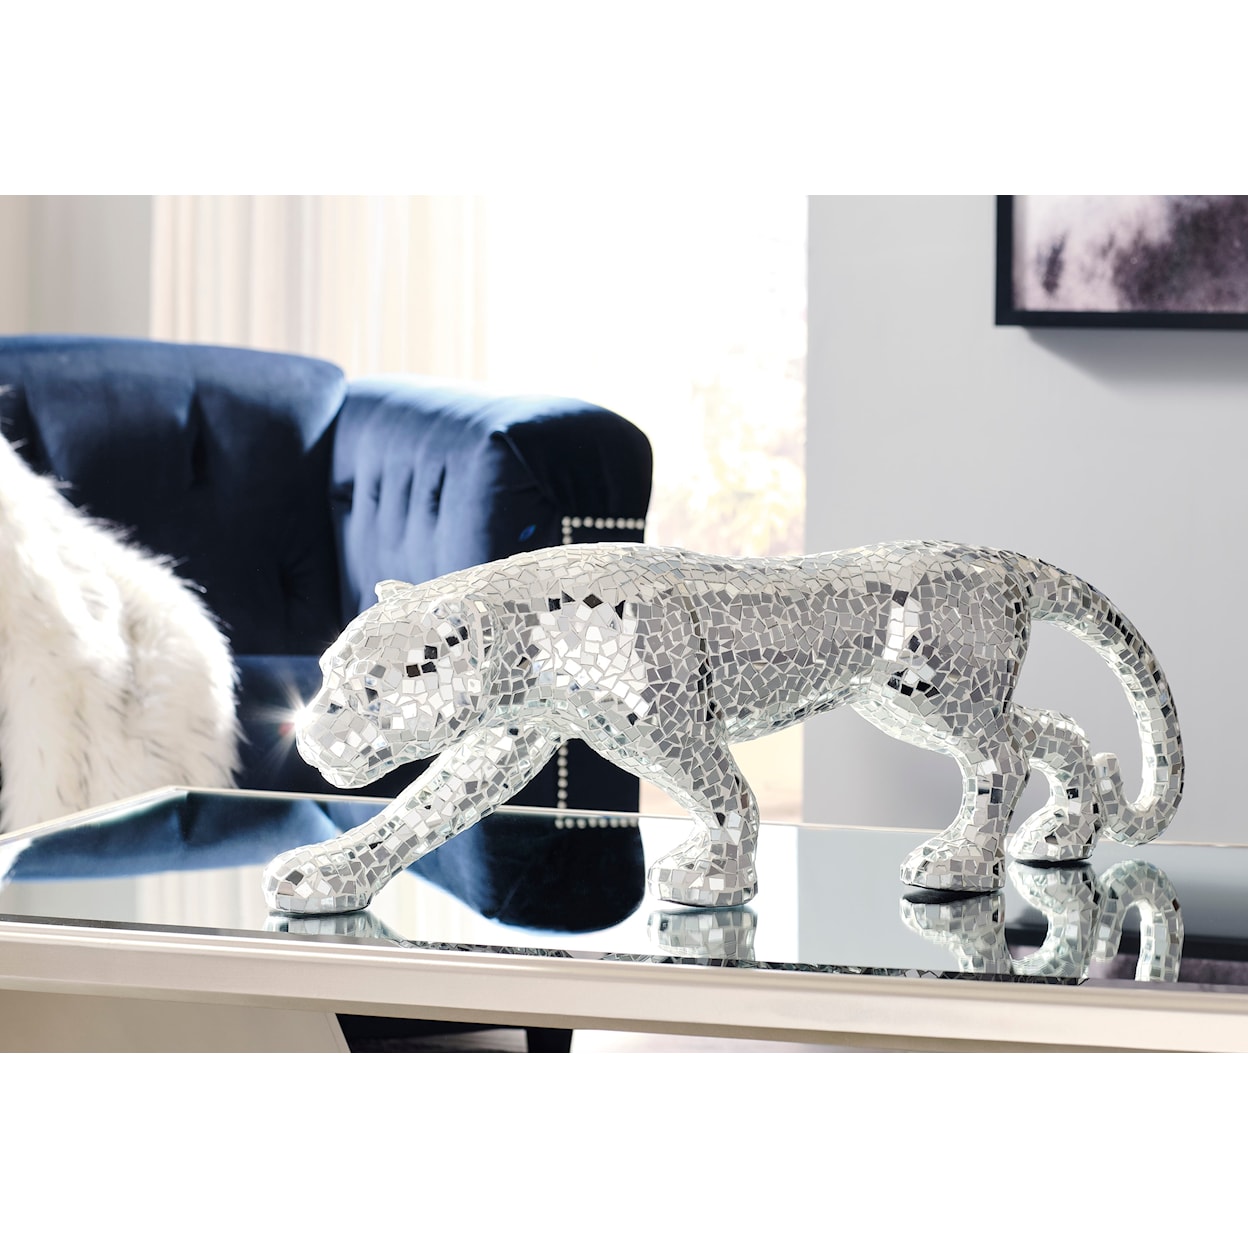 Benchcraft Accents Drice Panther Sculpture